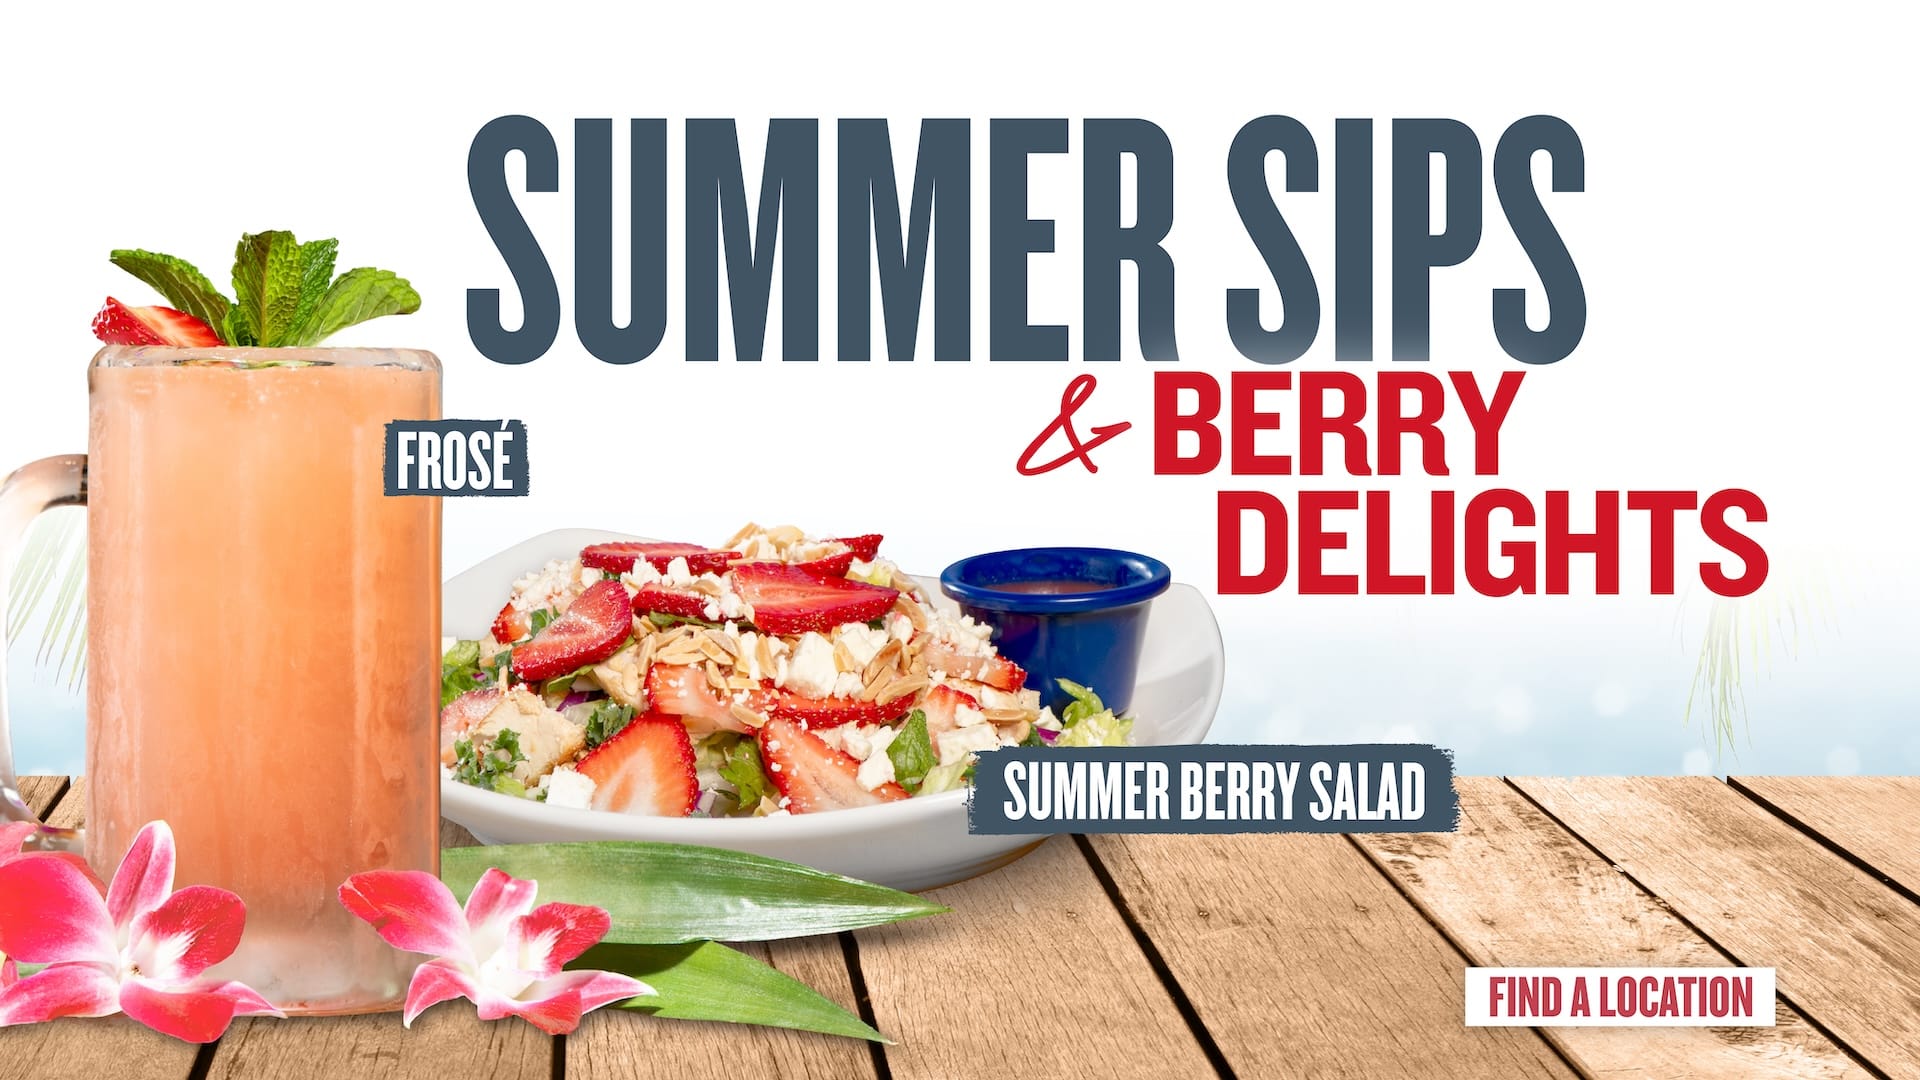 Summer Sips & Berry Delights - Frosé - Summer Berry Salad - Find a location